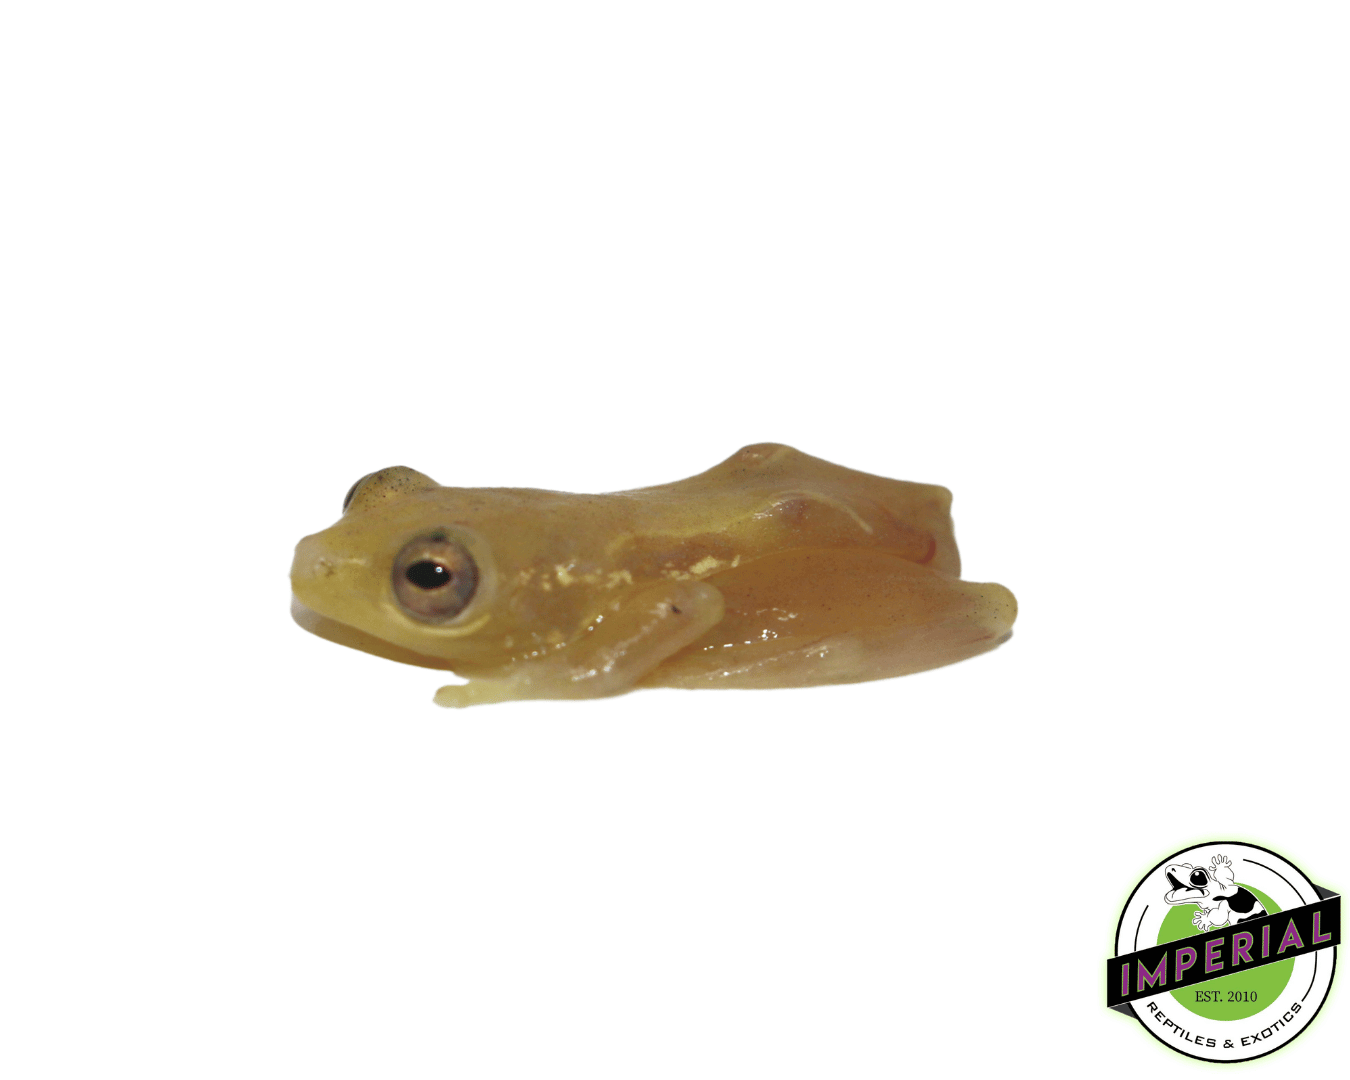 african reed frog for sale, buy amphibians online at cheap prices